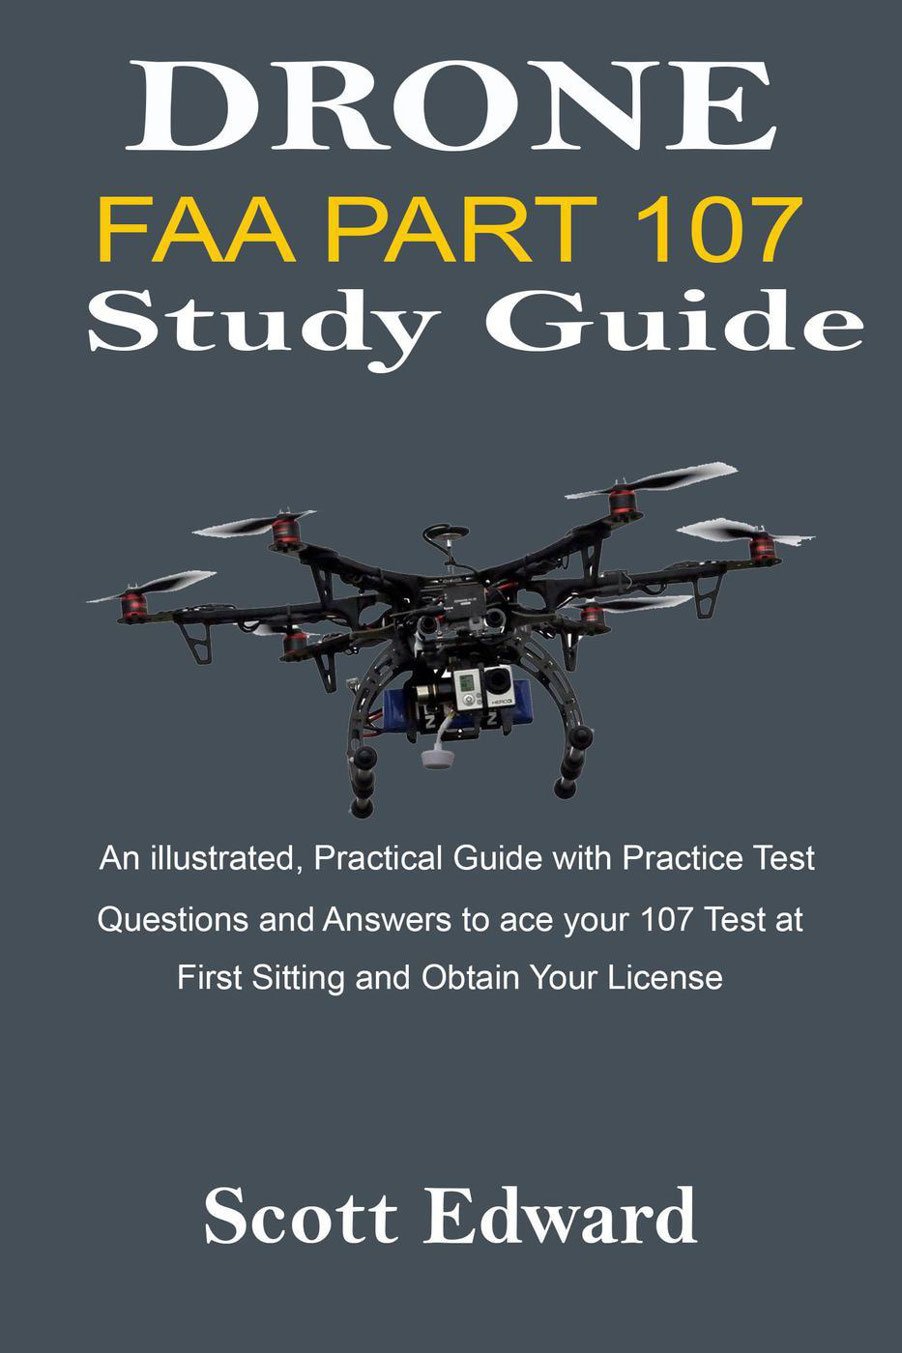 Drone FAA Part 107 Study Guide An illustrated, Practical Guide with